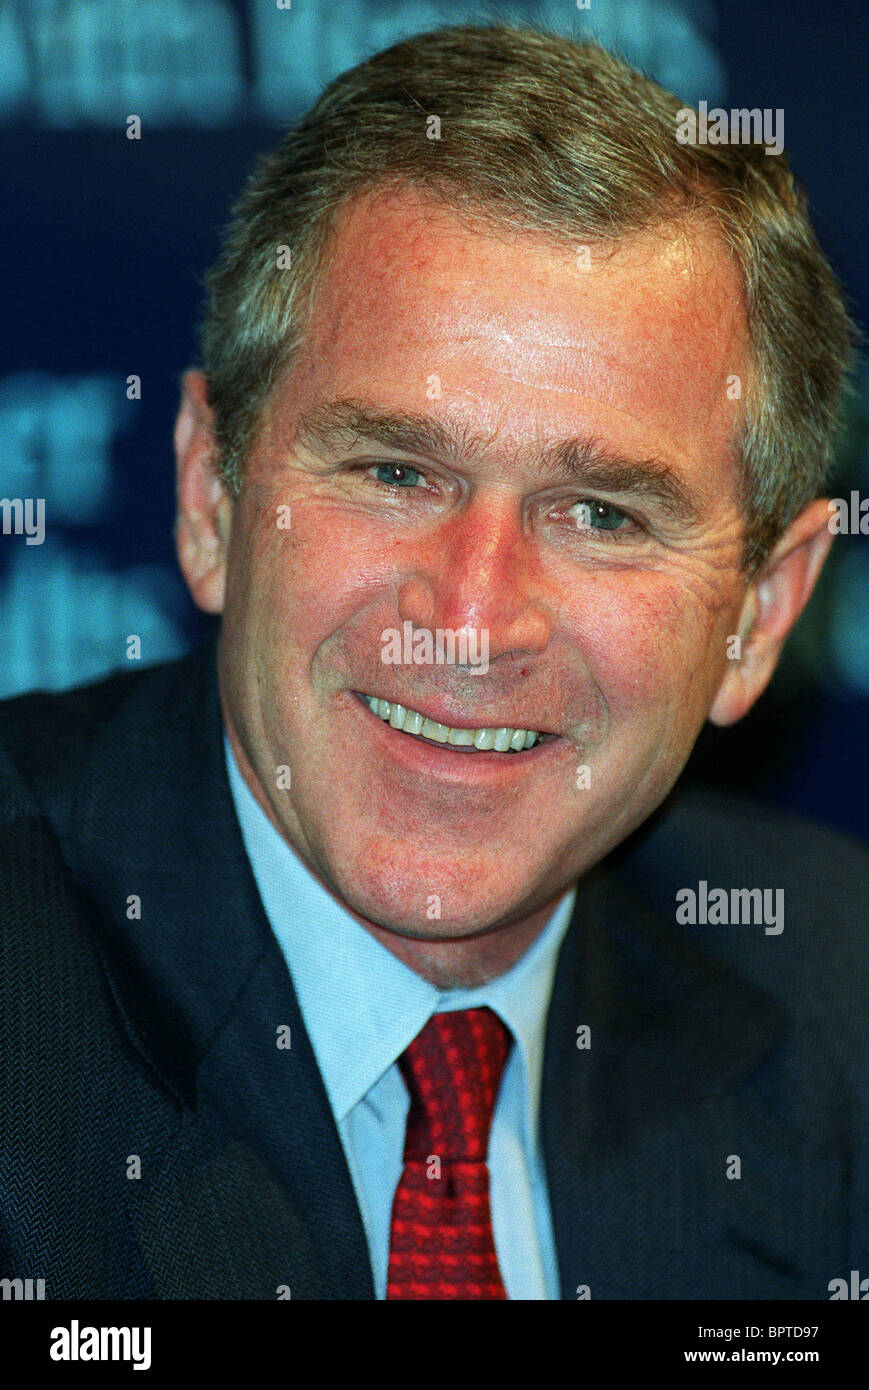 GEORGE W. BUSH GOVERNOR OF TEXAS 05 March 2000 Stock Photo